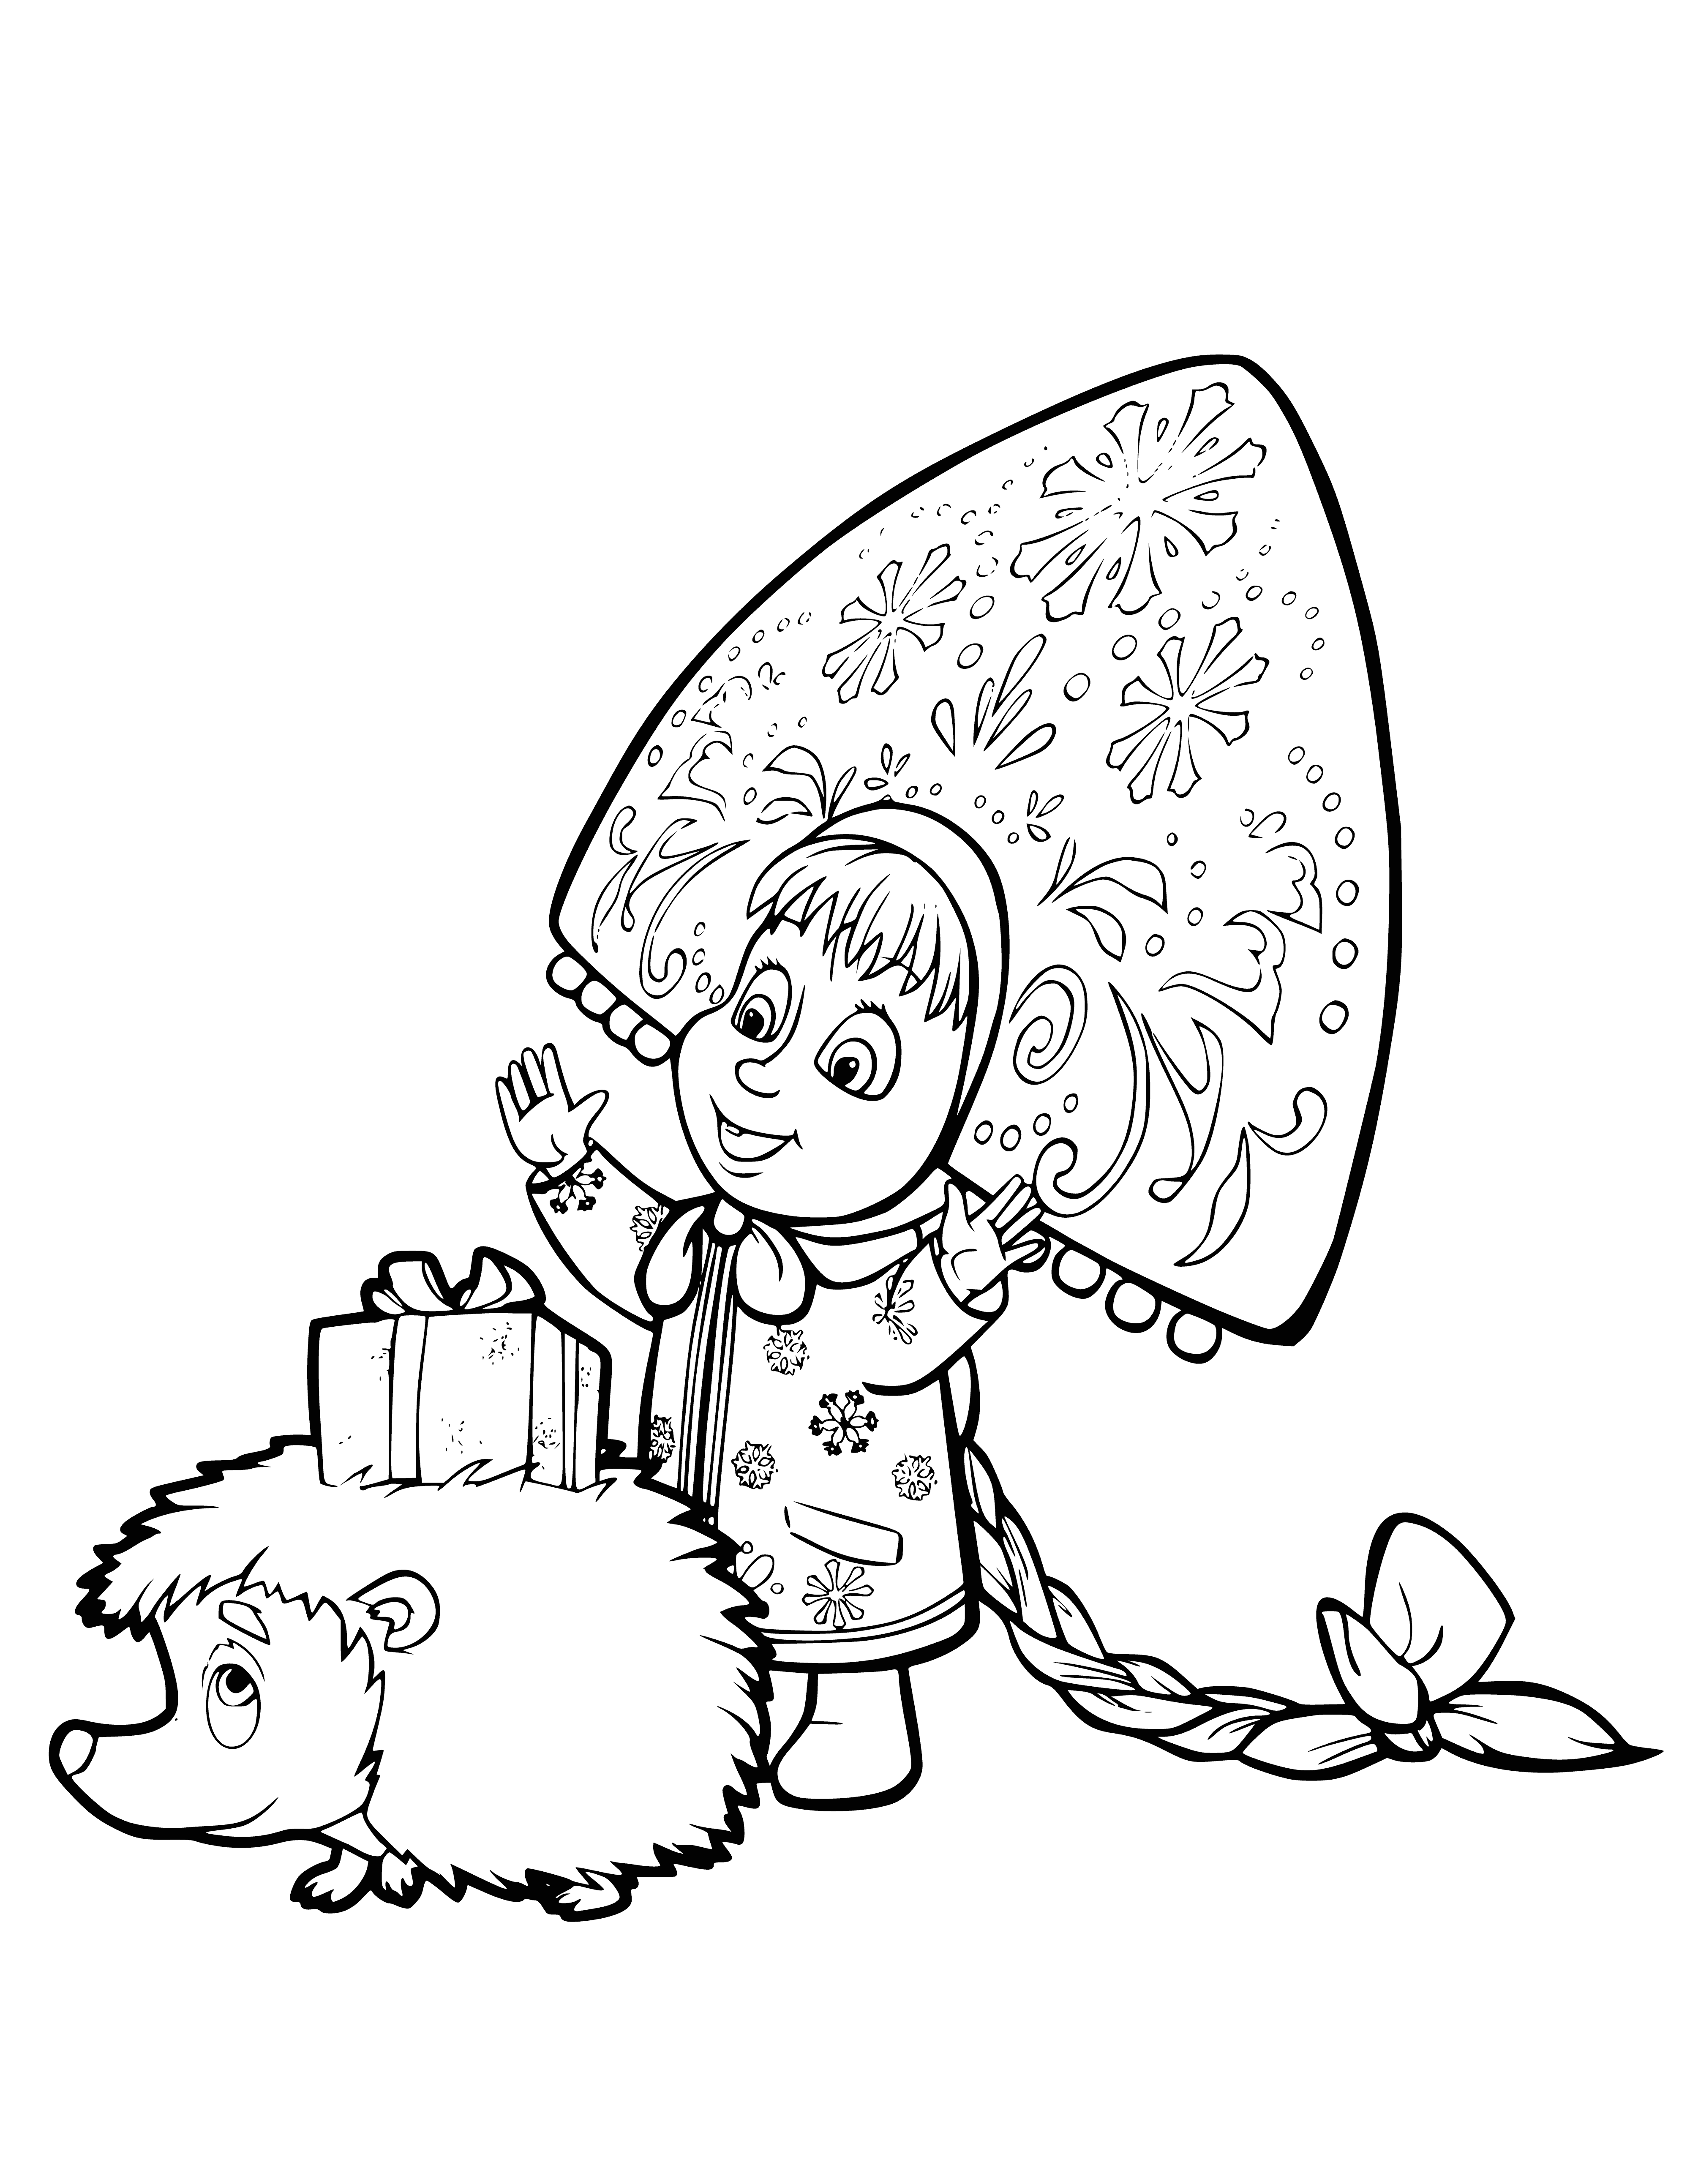 coloring page: Masha is smiling at the Bear, holding a basket of flowers on a hill.